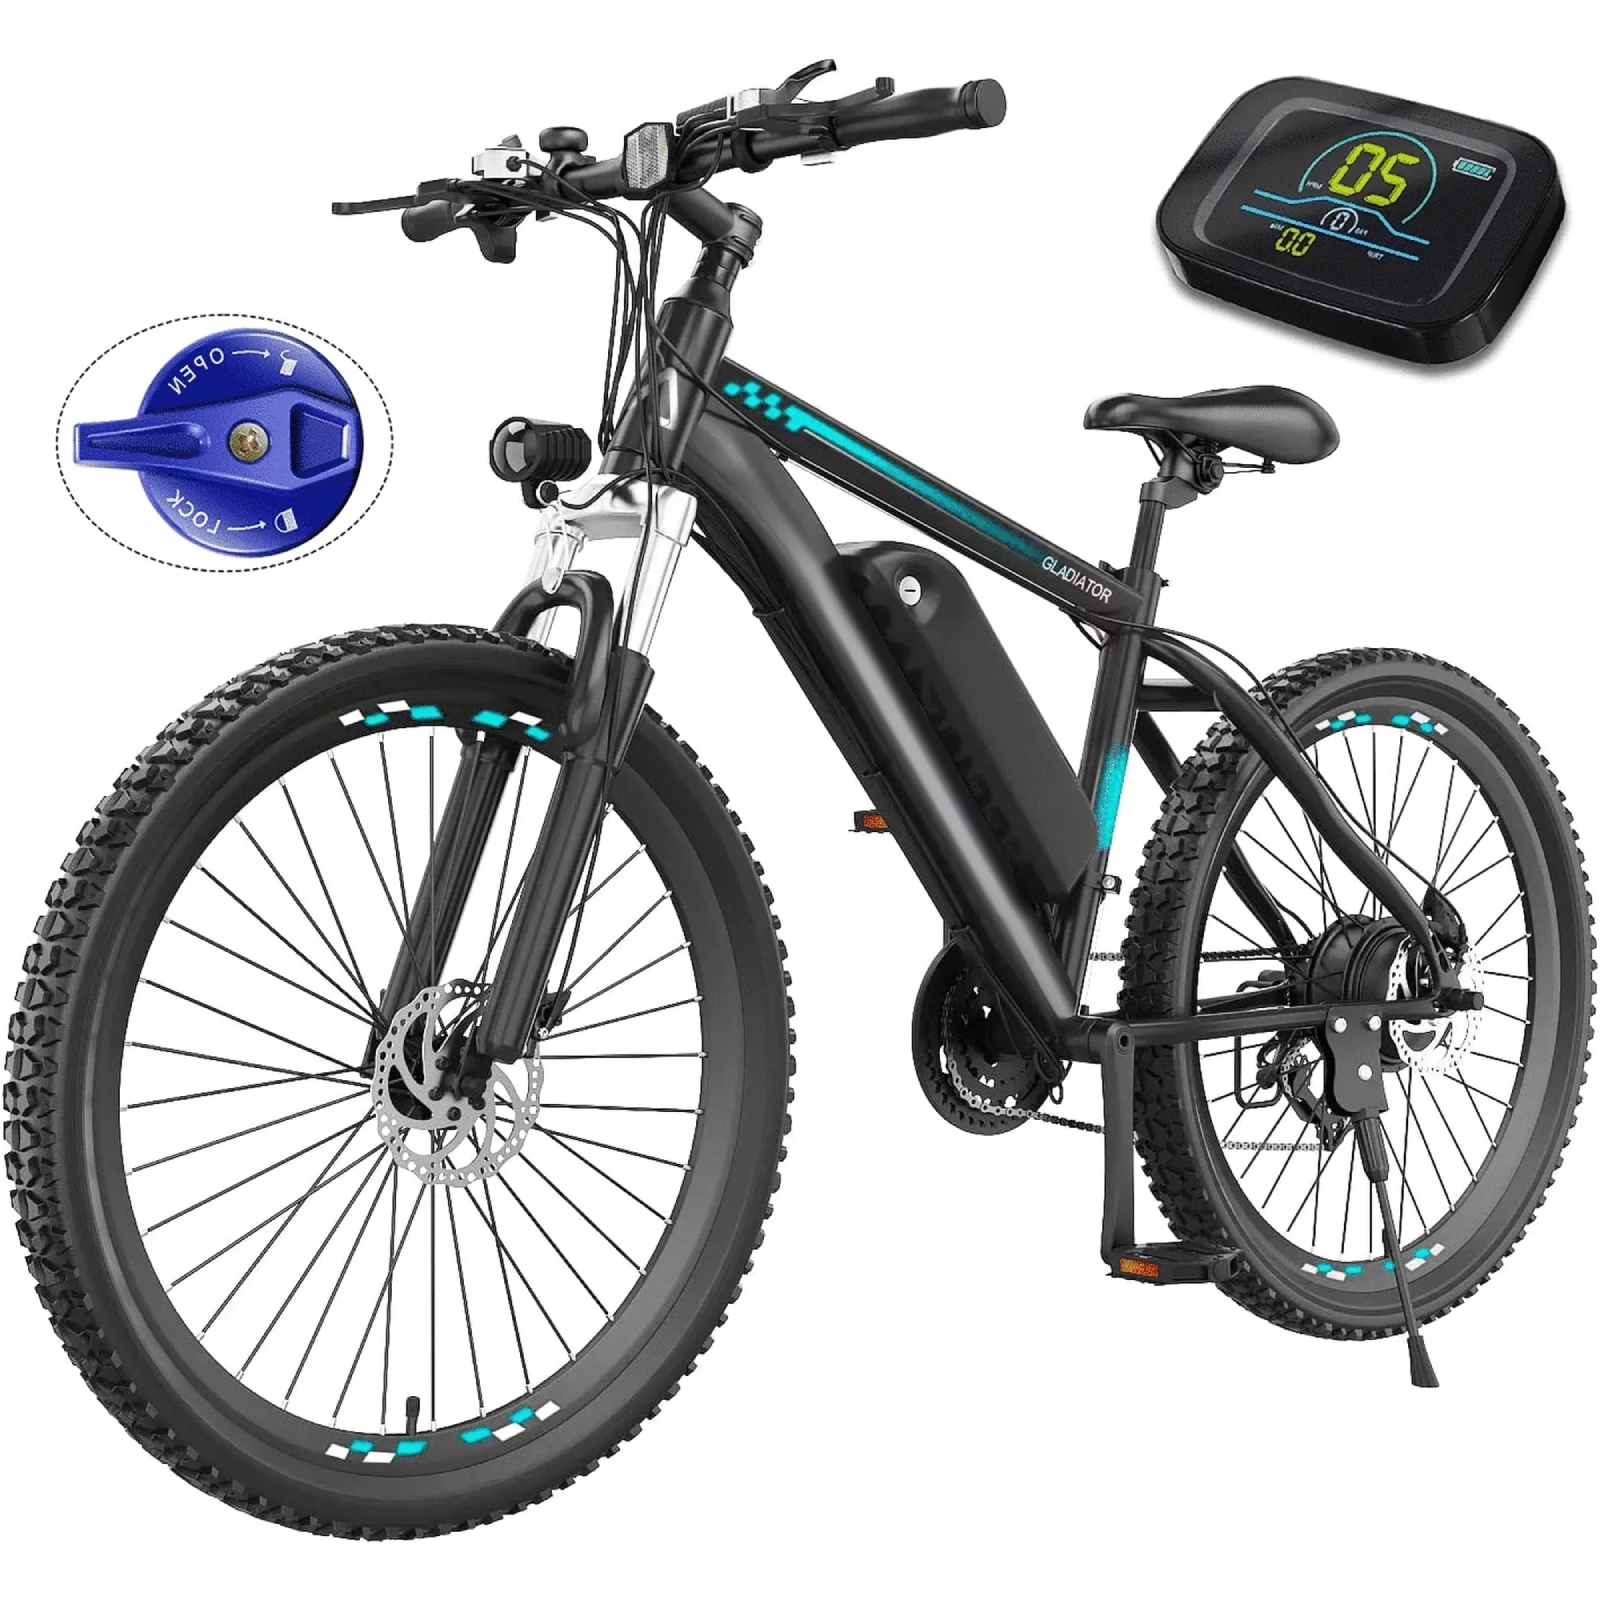 Electric Bike, 26" x 4" Fat Tire Electric Bike for Adults 500W 19.8MPH Electric Mountain Bicycle Snow Beach Ebike, 48V 10.4Ah Battery, Lockable Suspension Fork, LCD Display, Fast Charge, Red - image 5 of 16